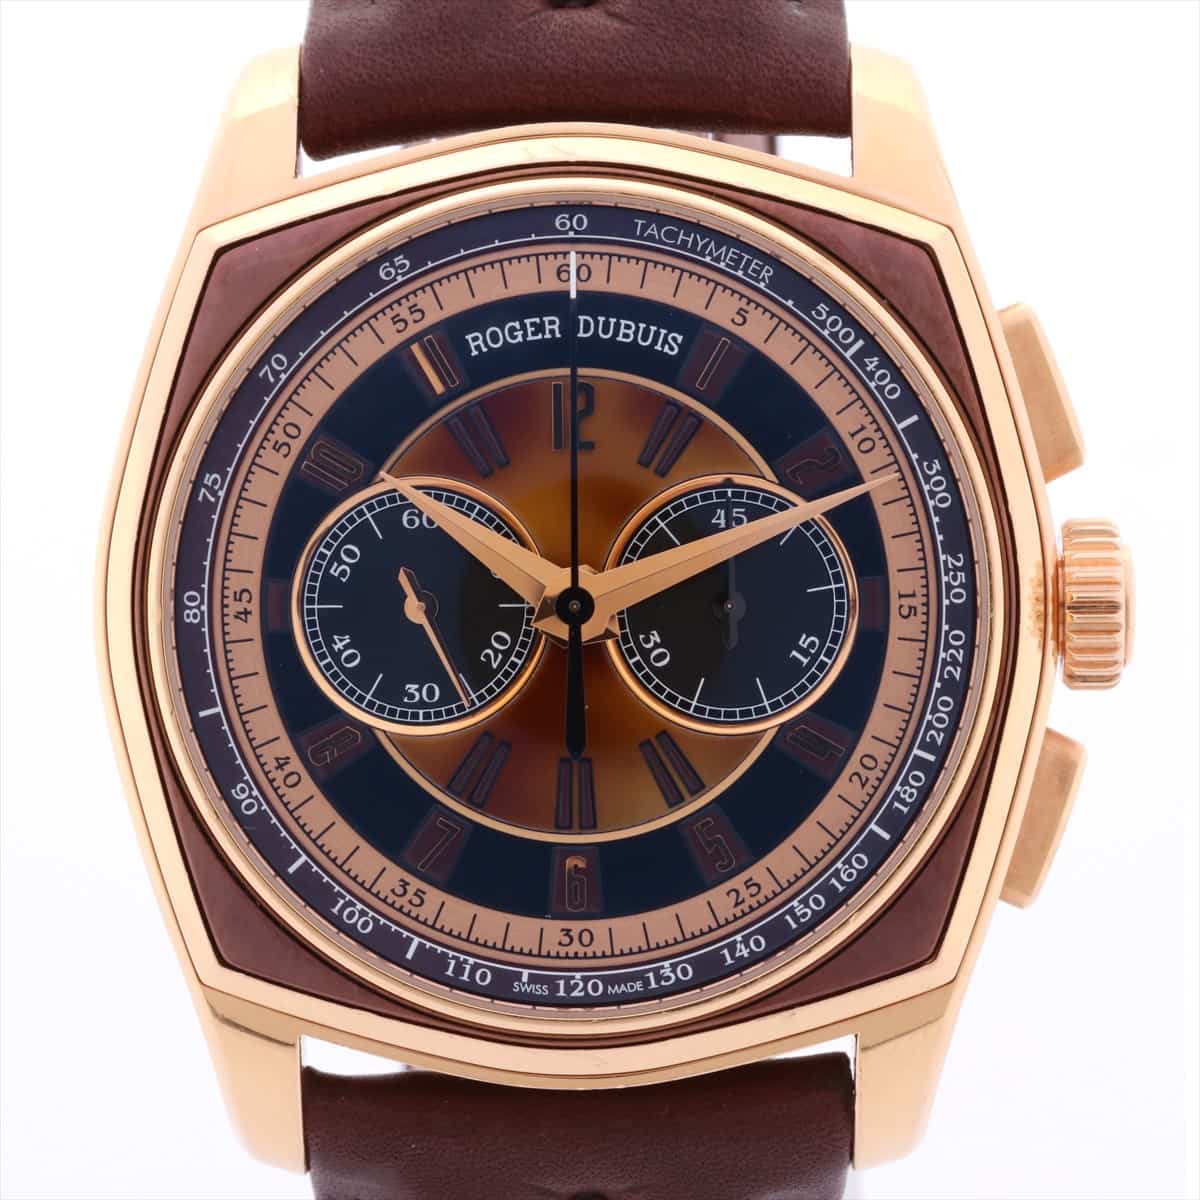 Roger Dubuis Monegesque DBMG0007 750 & leather AT Black-Face Damaged box